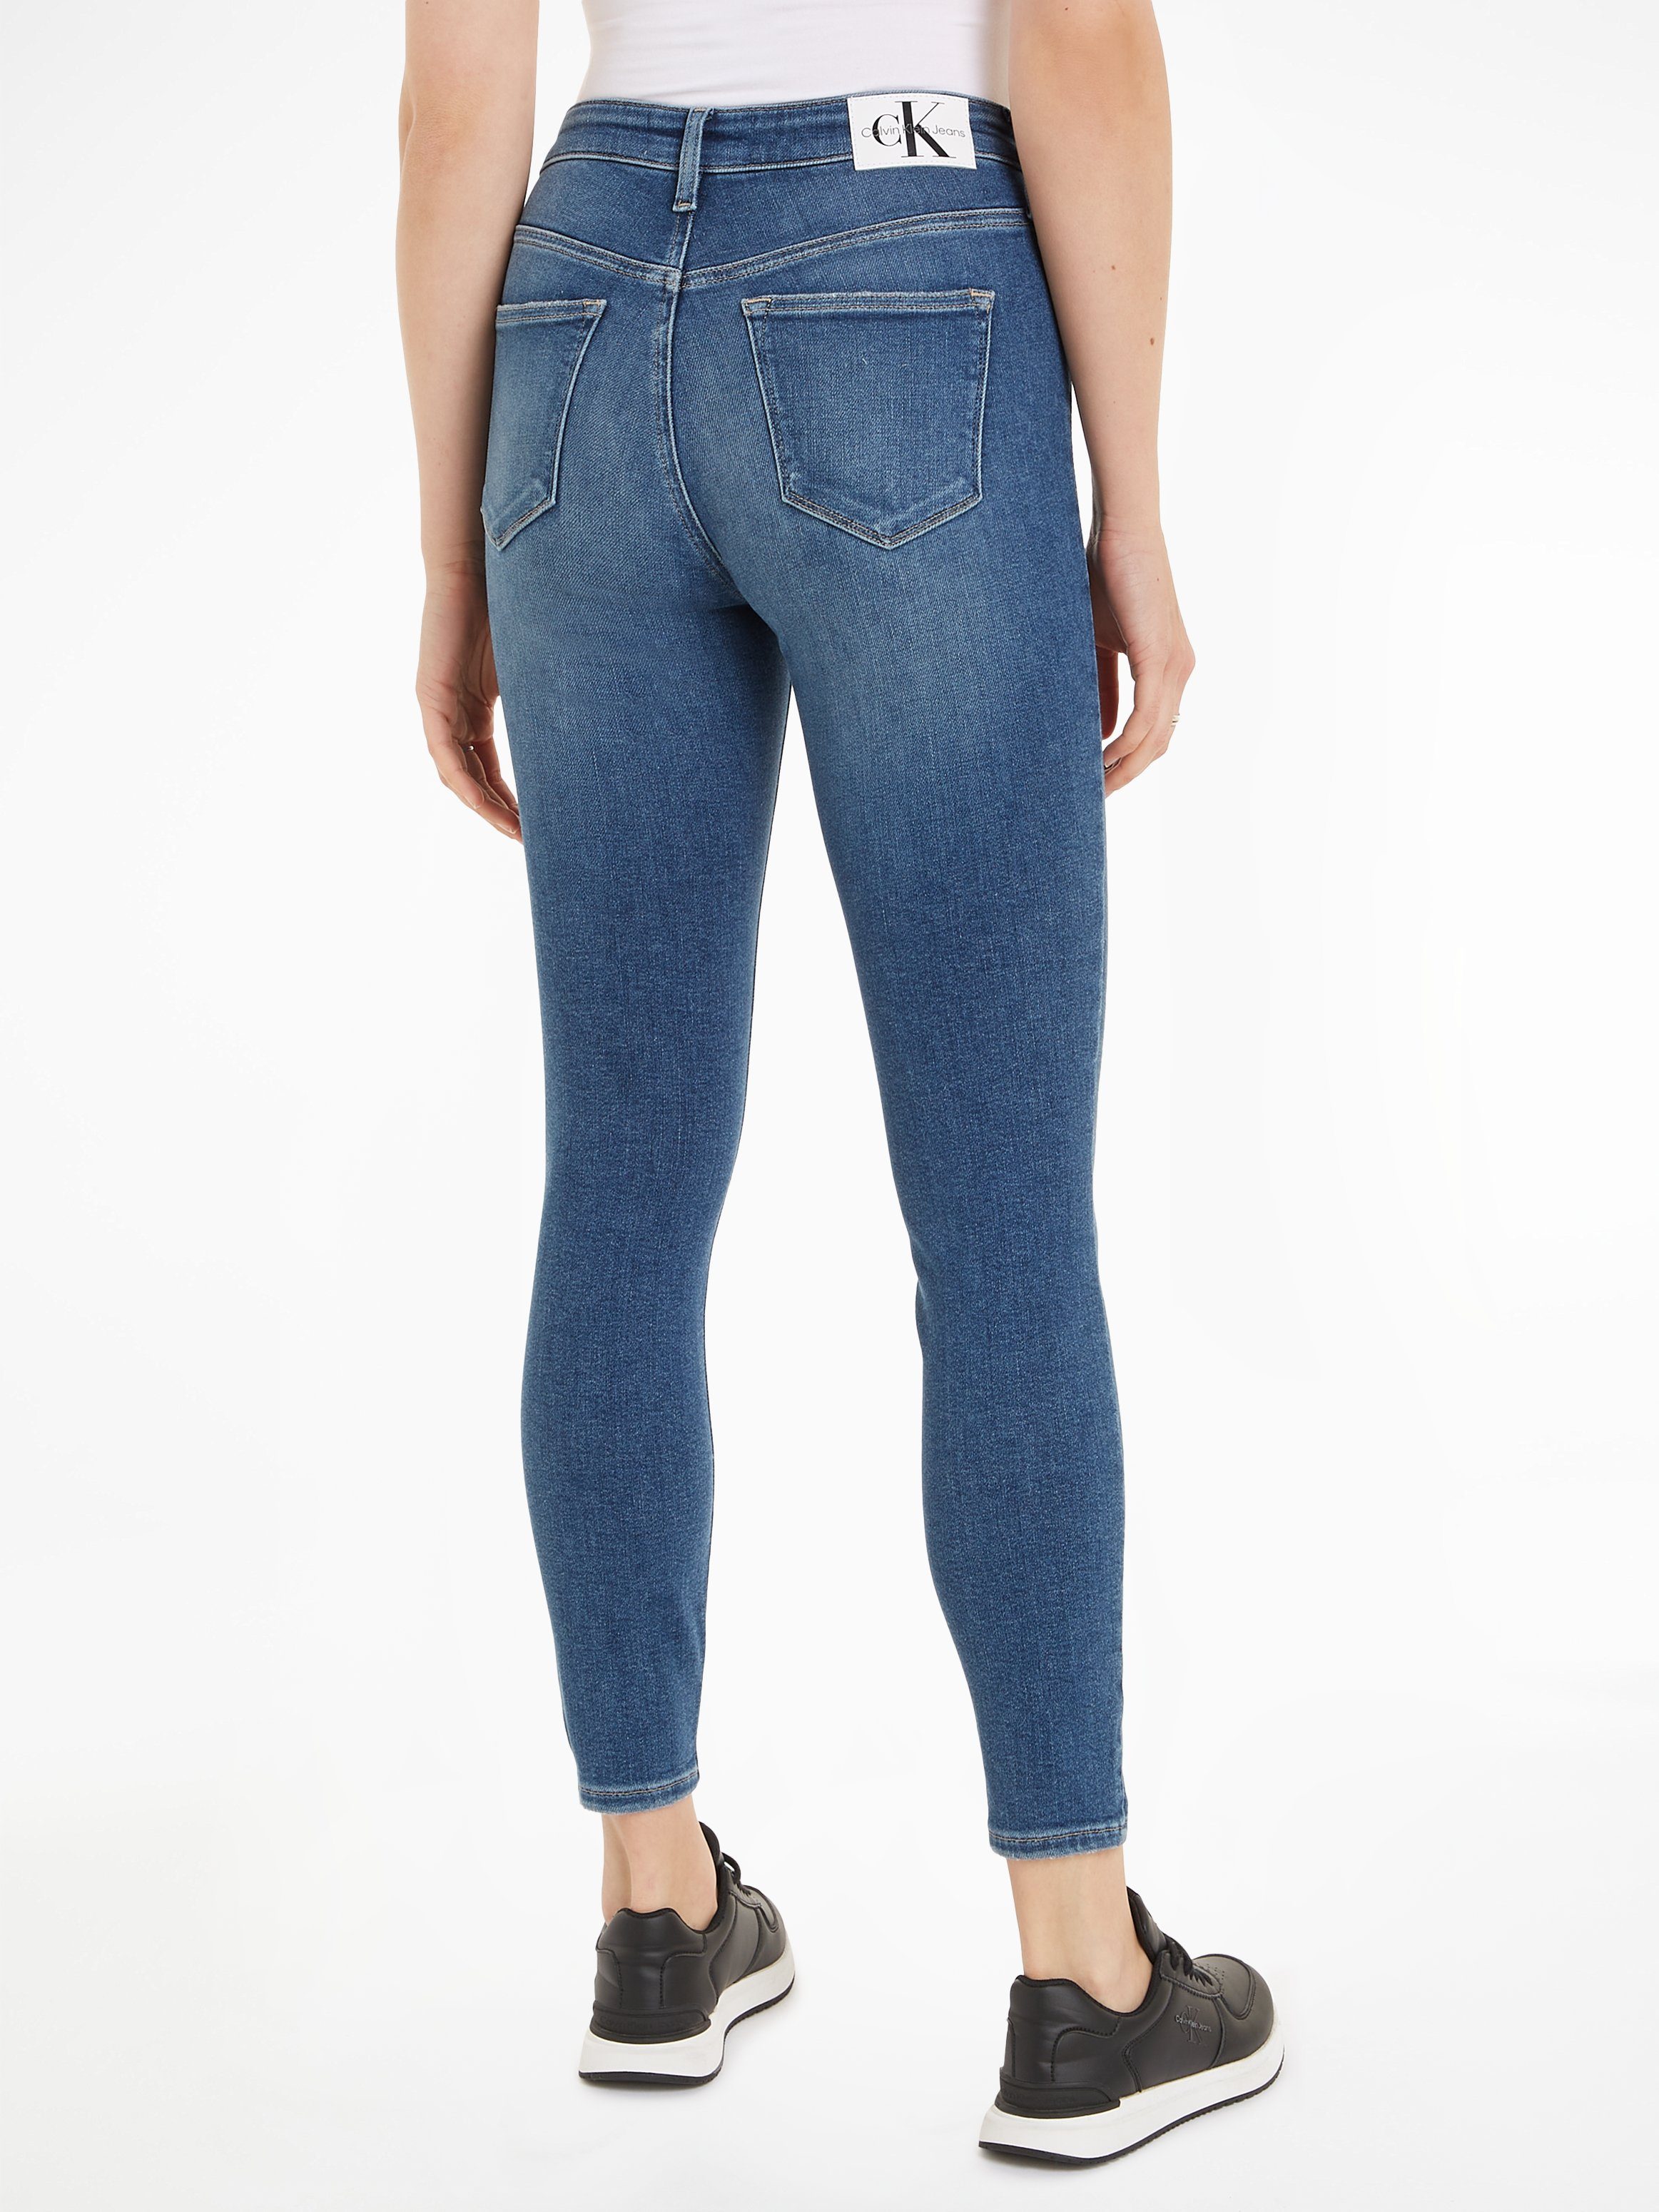 Calvin Klein Jeans SUPER HIGH ANKLE Ankle-Jeans RISE SKINNY